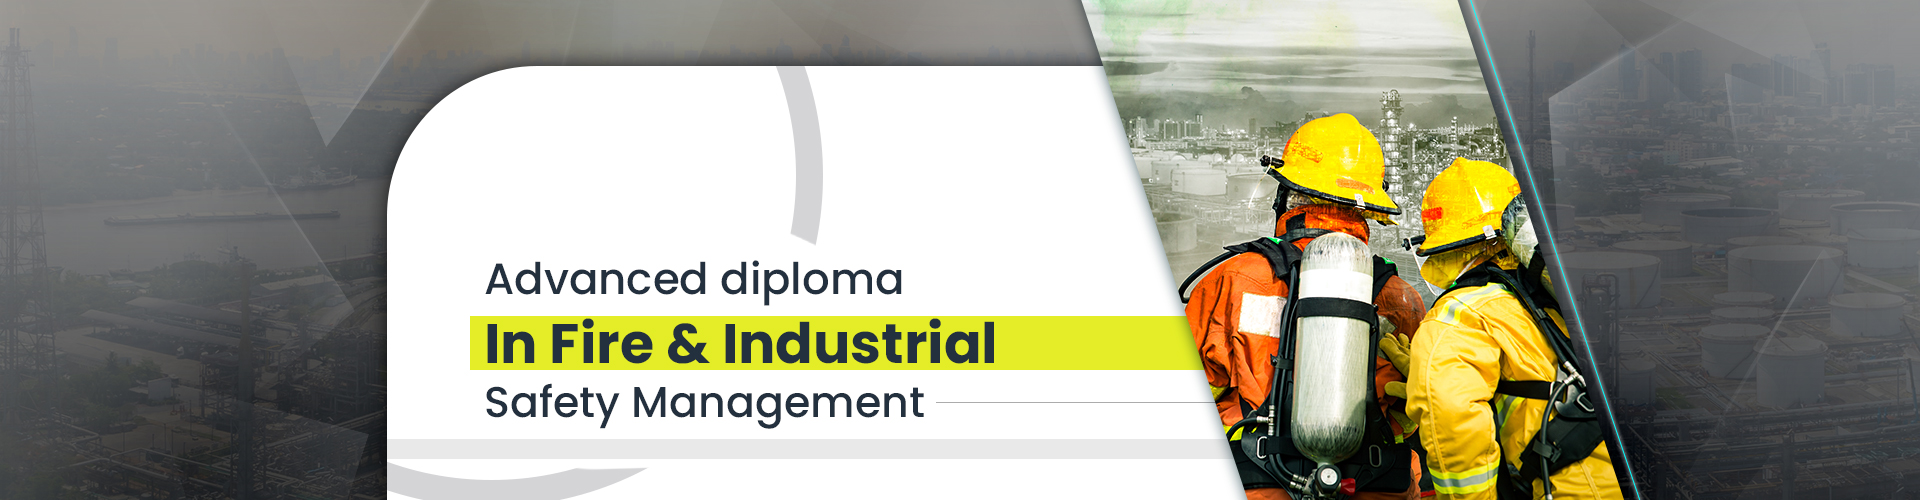 ADVANCED DIPLOMA IN FIRE and INDUSTRIAL SAFETY MANAGEMENT